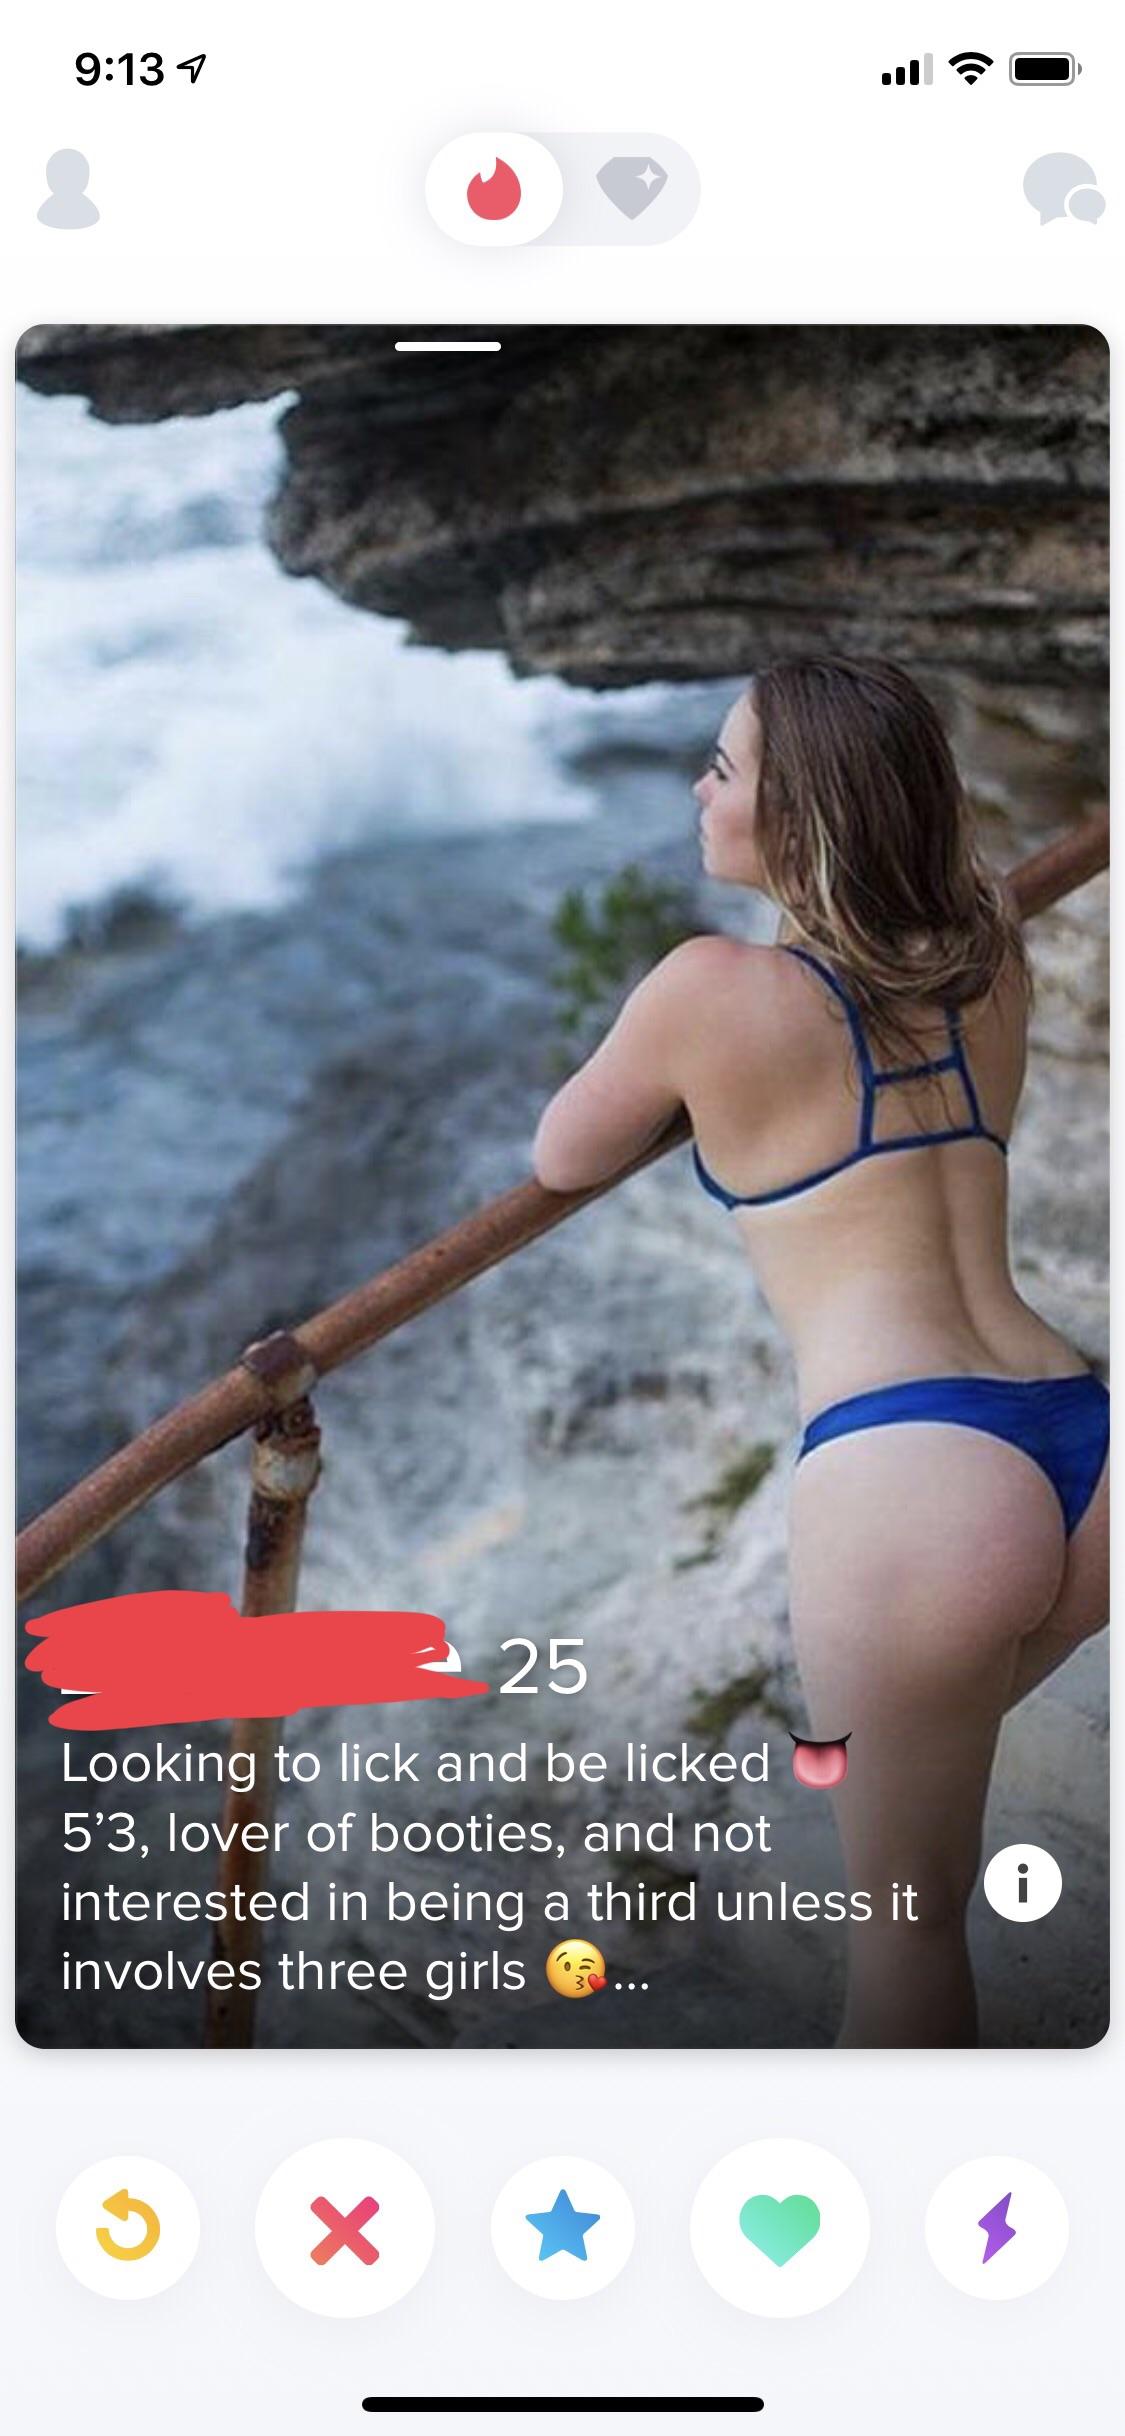 bikini - Looking to lick and be licked 5'3, lover of booties, and not interested in being a third unless it involves three girls ...